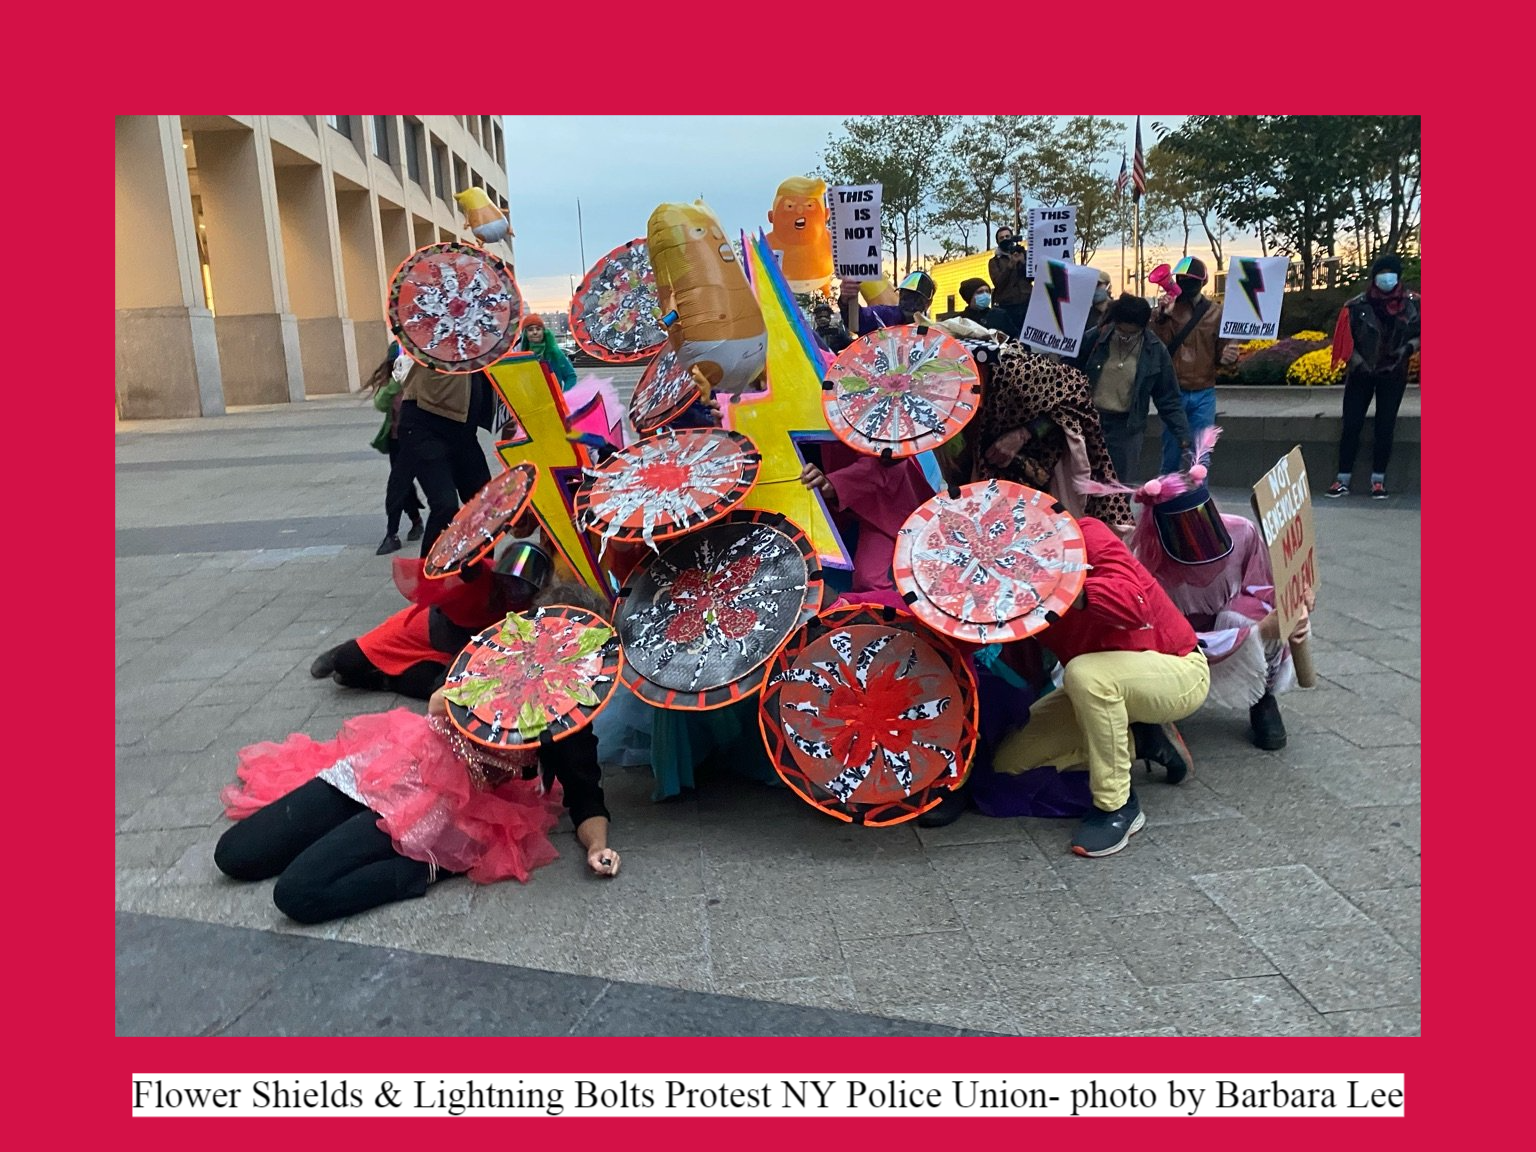 Flower Shields & Lightning Bolts Protest NY Police Union- photo by Barbara Lee